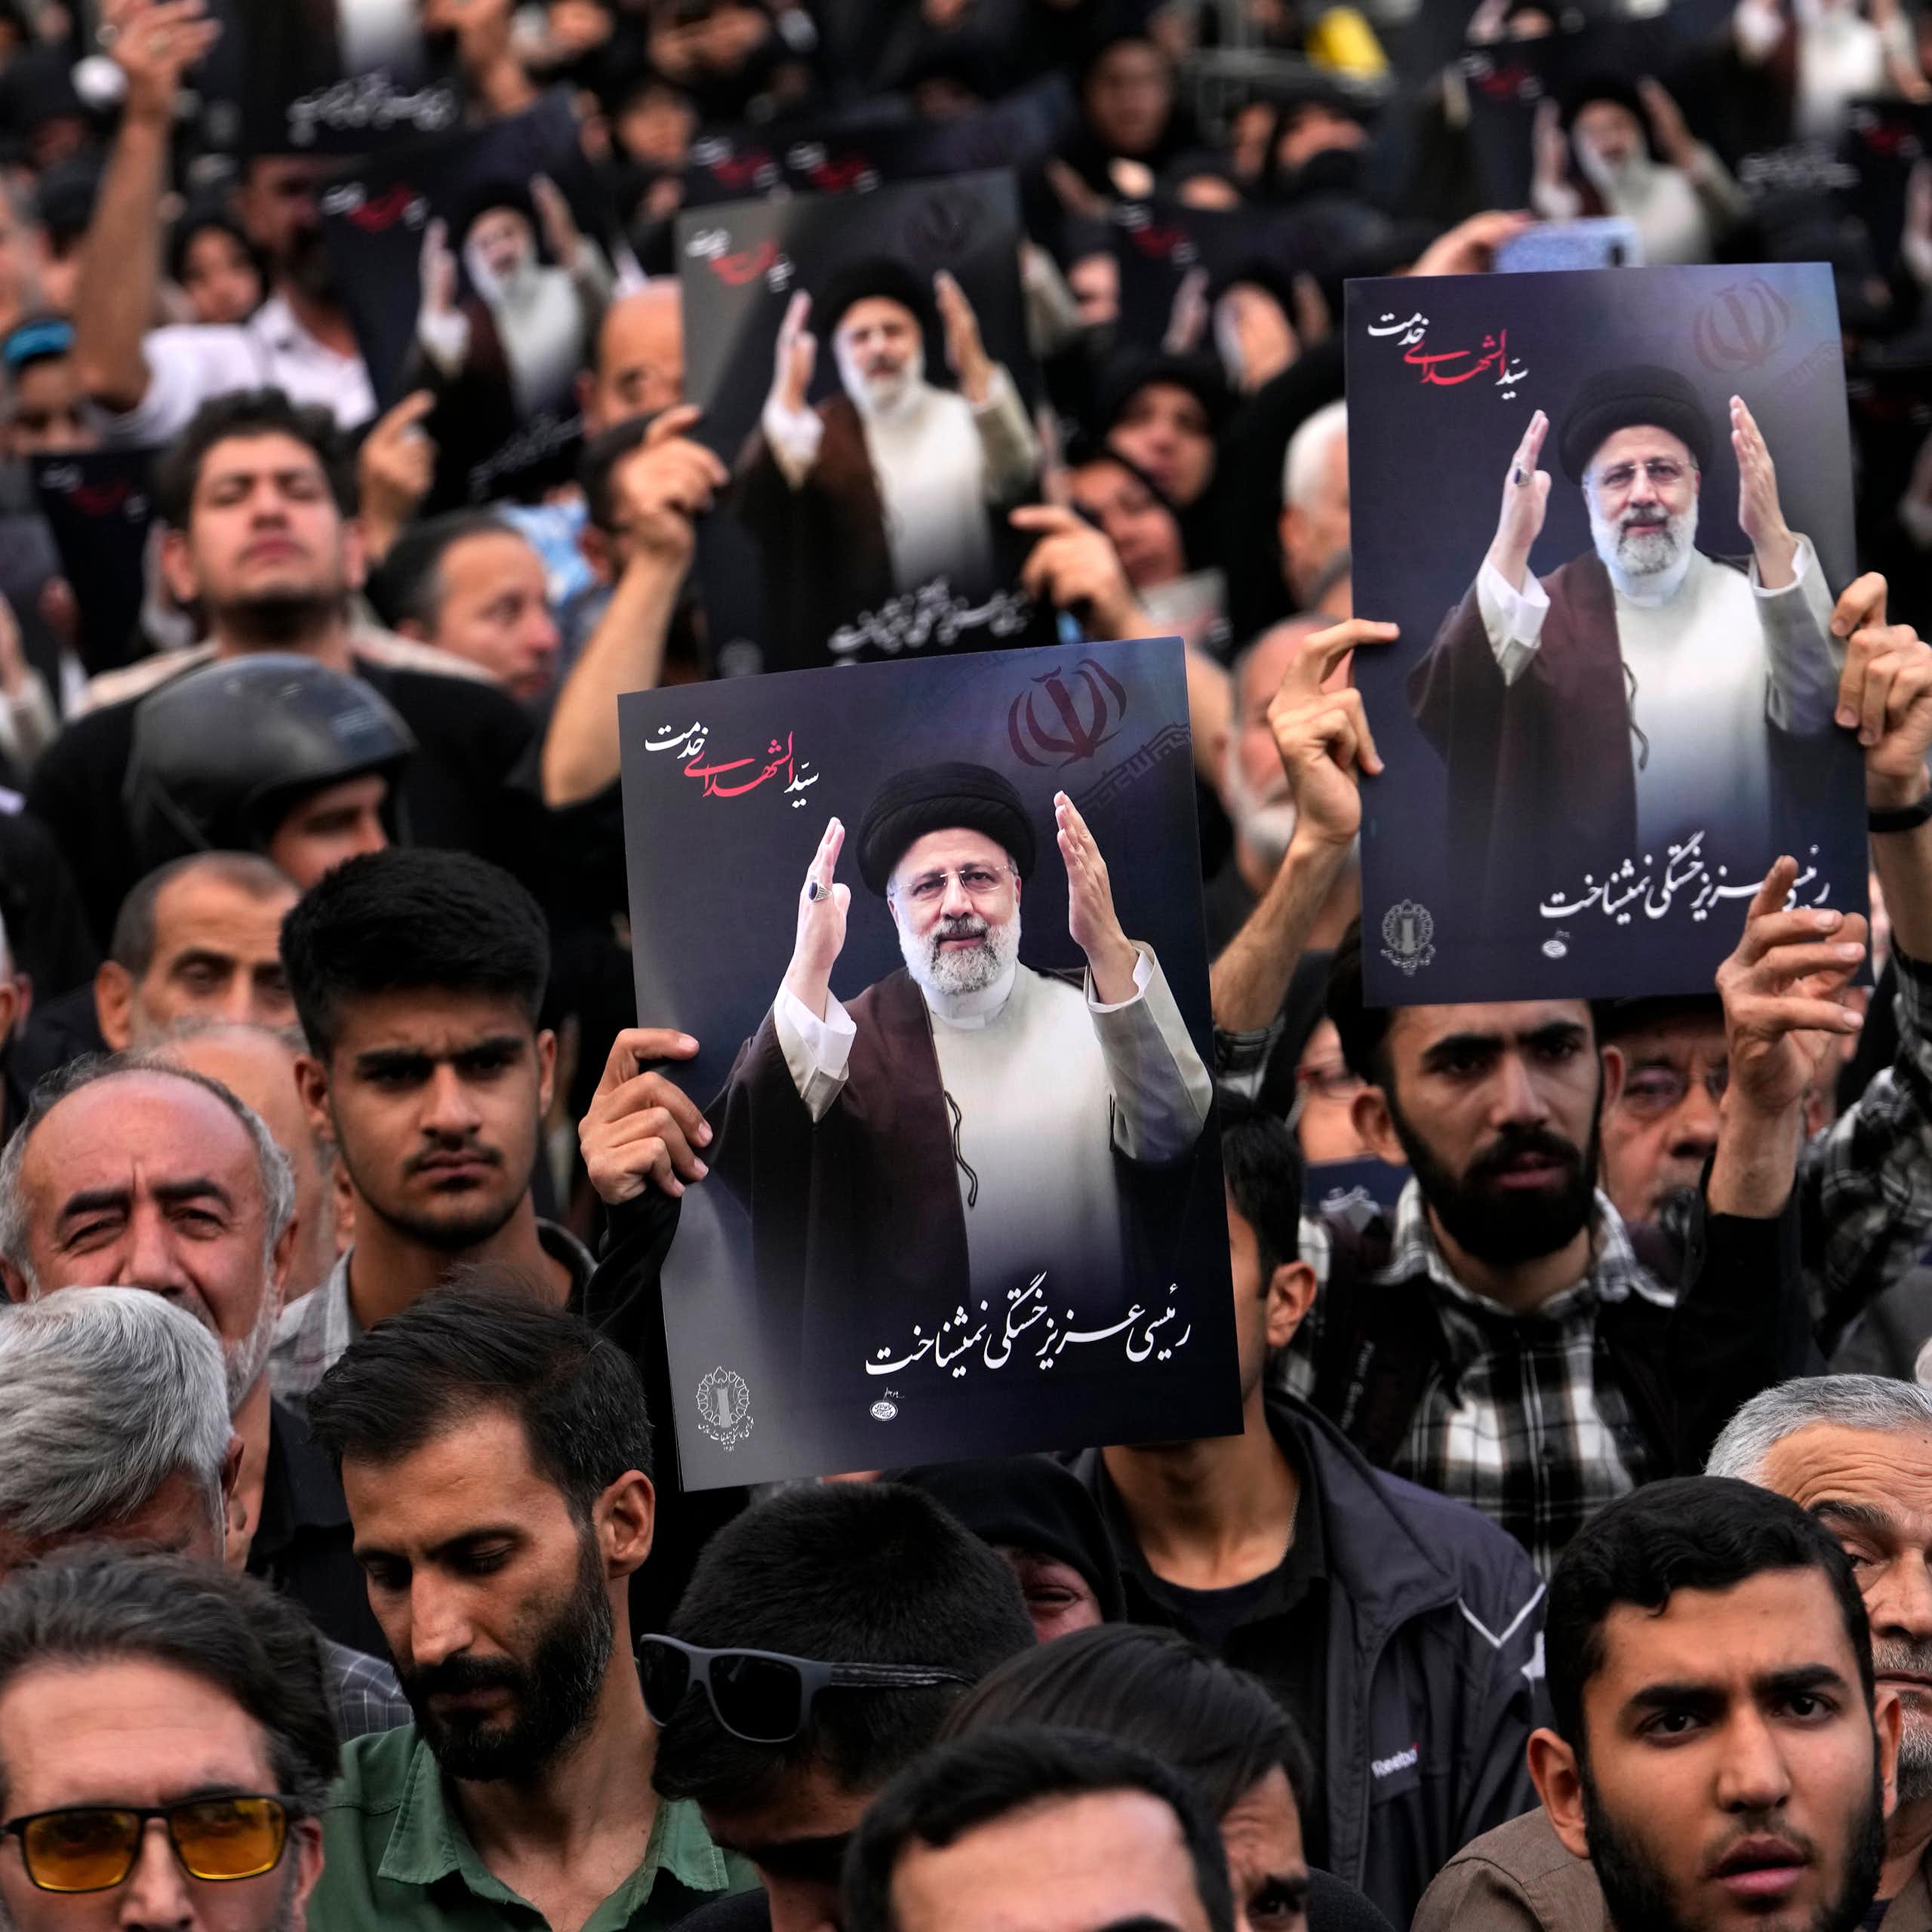 People hold up posters with pictures of a man in a black robe and turban with words below written in Persian.